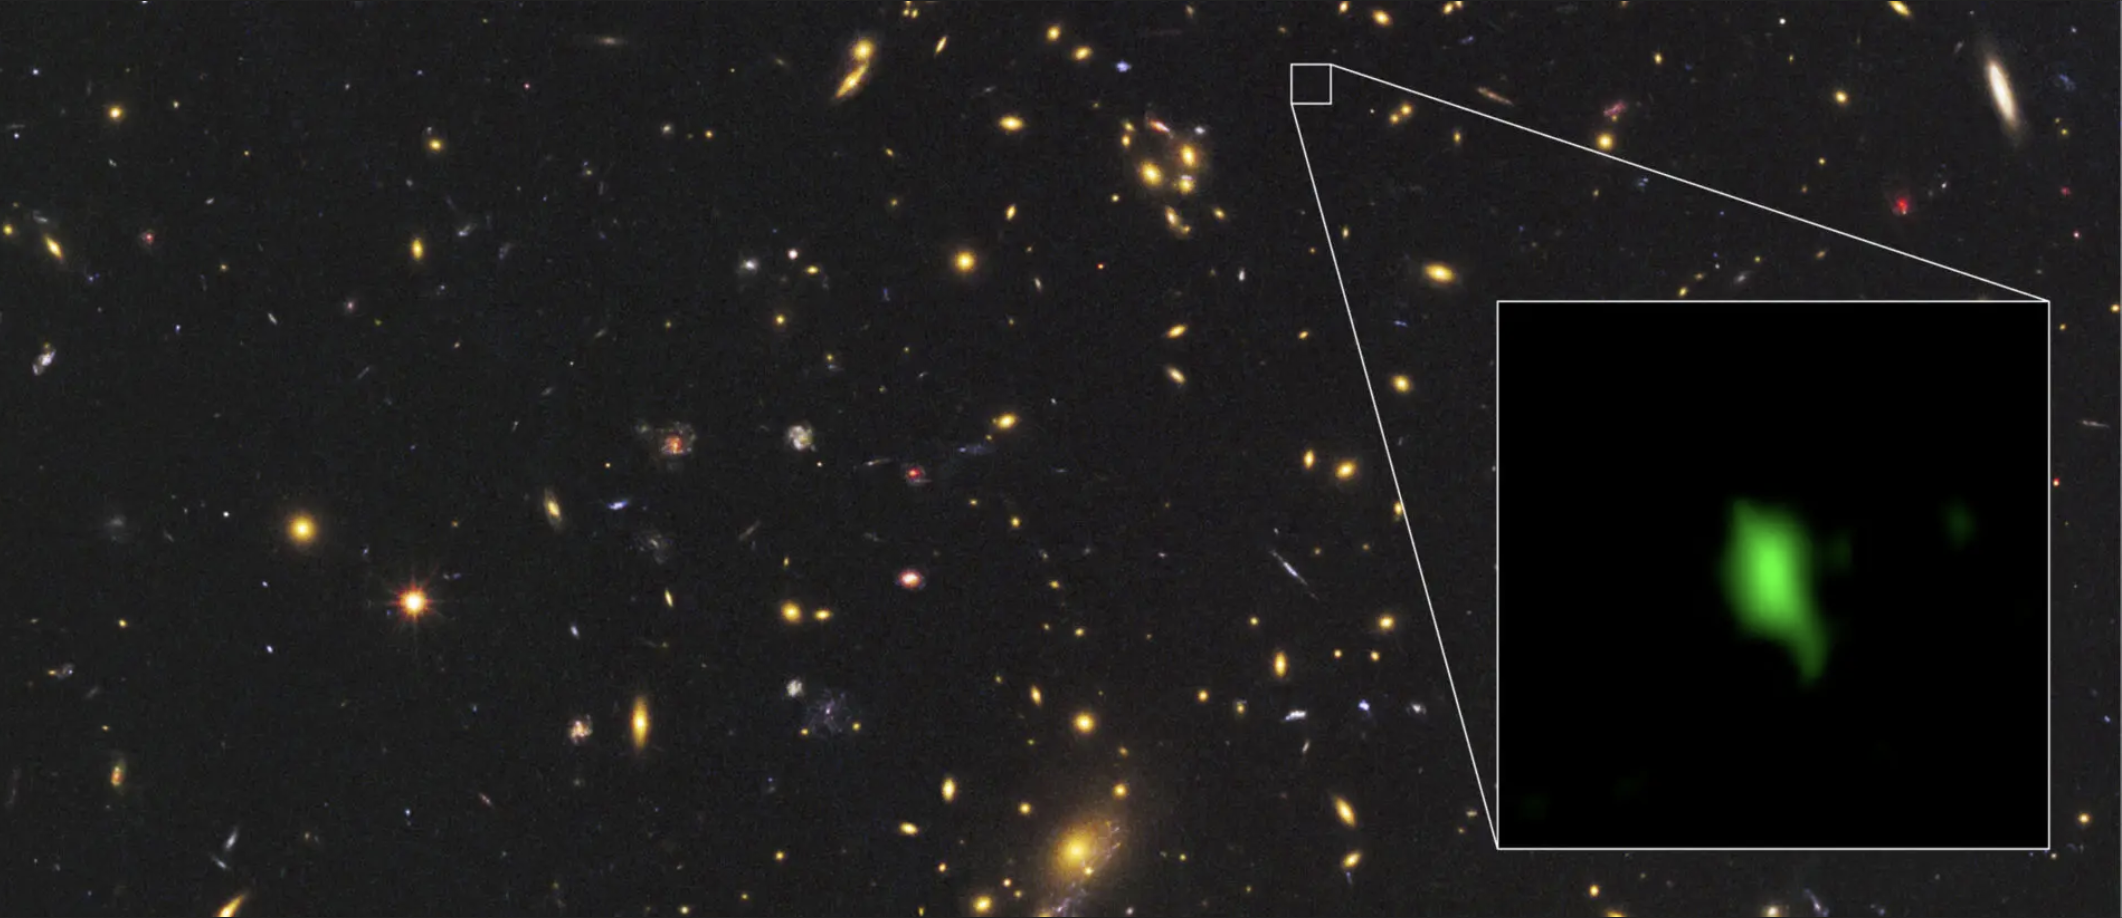 Hold your breath: oxygen found in the very early Universe